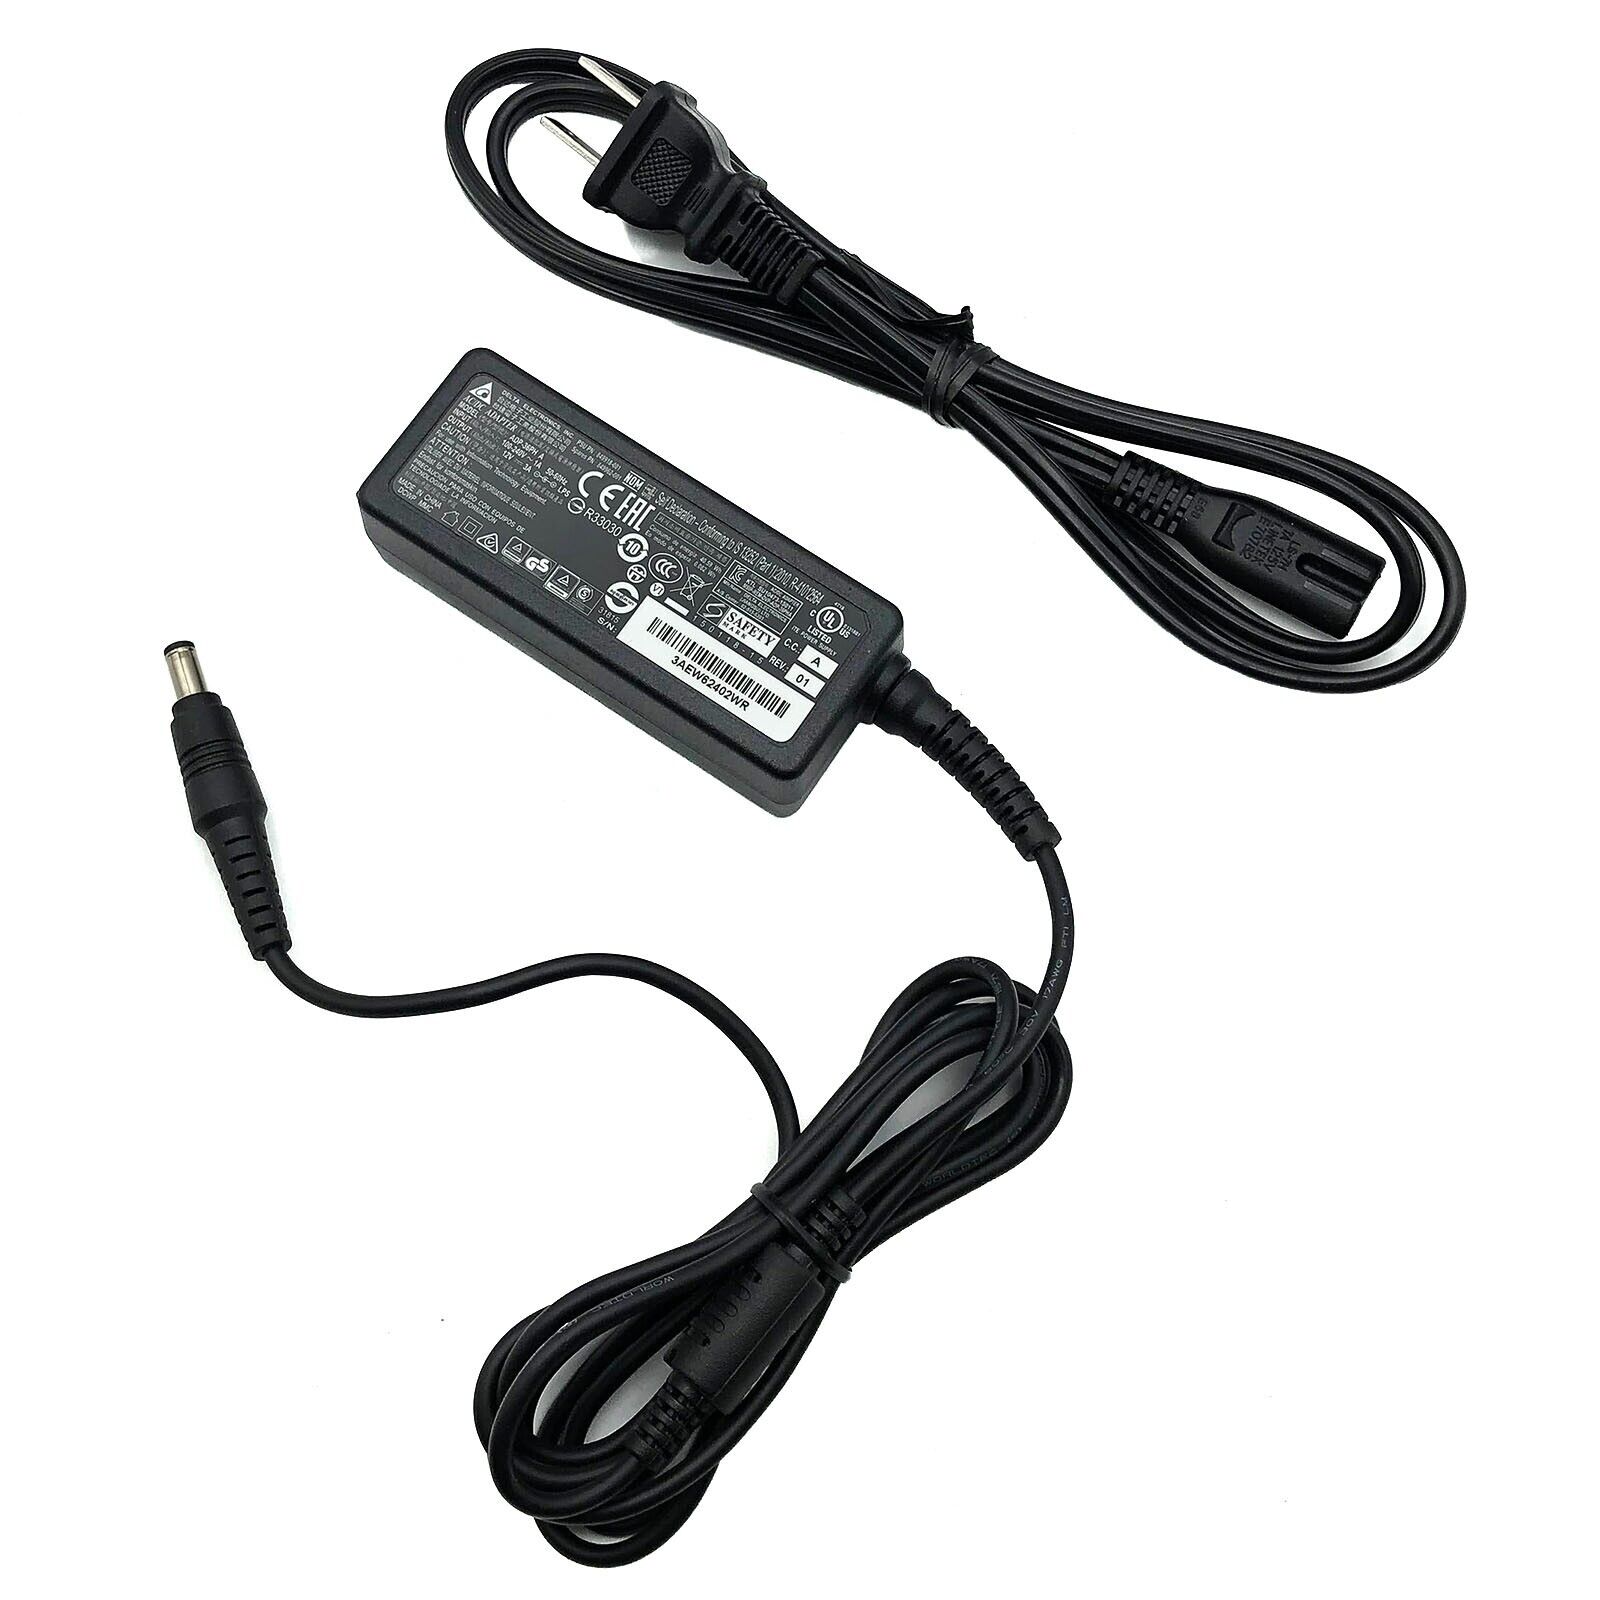 Genuine Delta 12V AC Adapter Charger For Cisco 880 881 890 891 Router w/PC